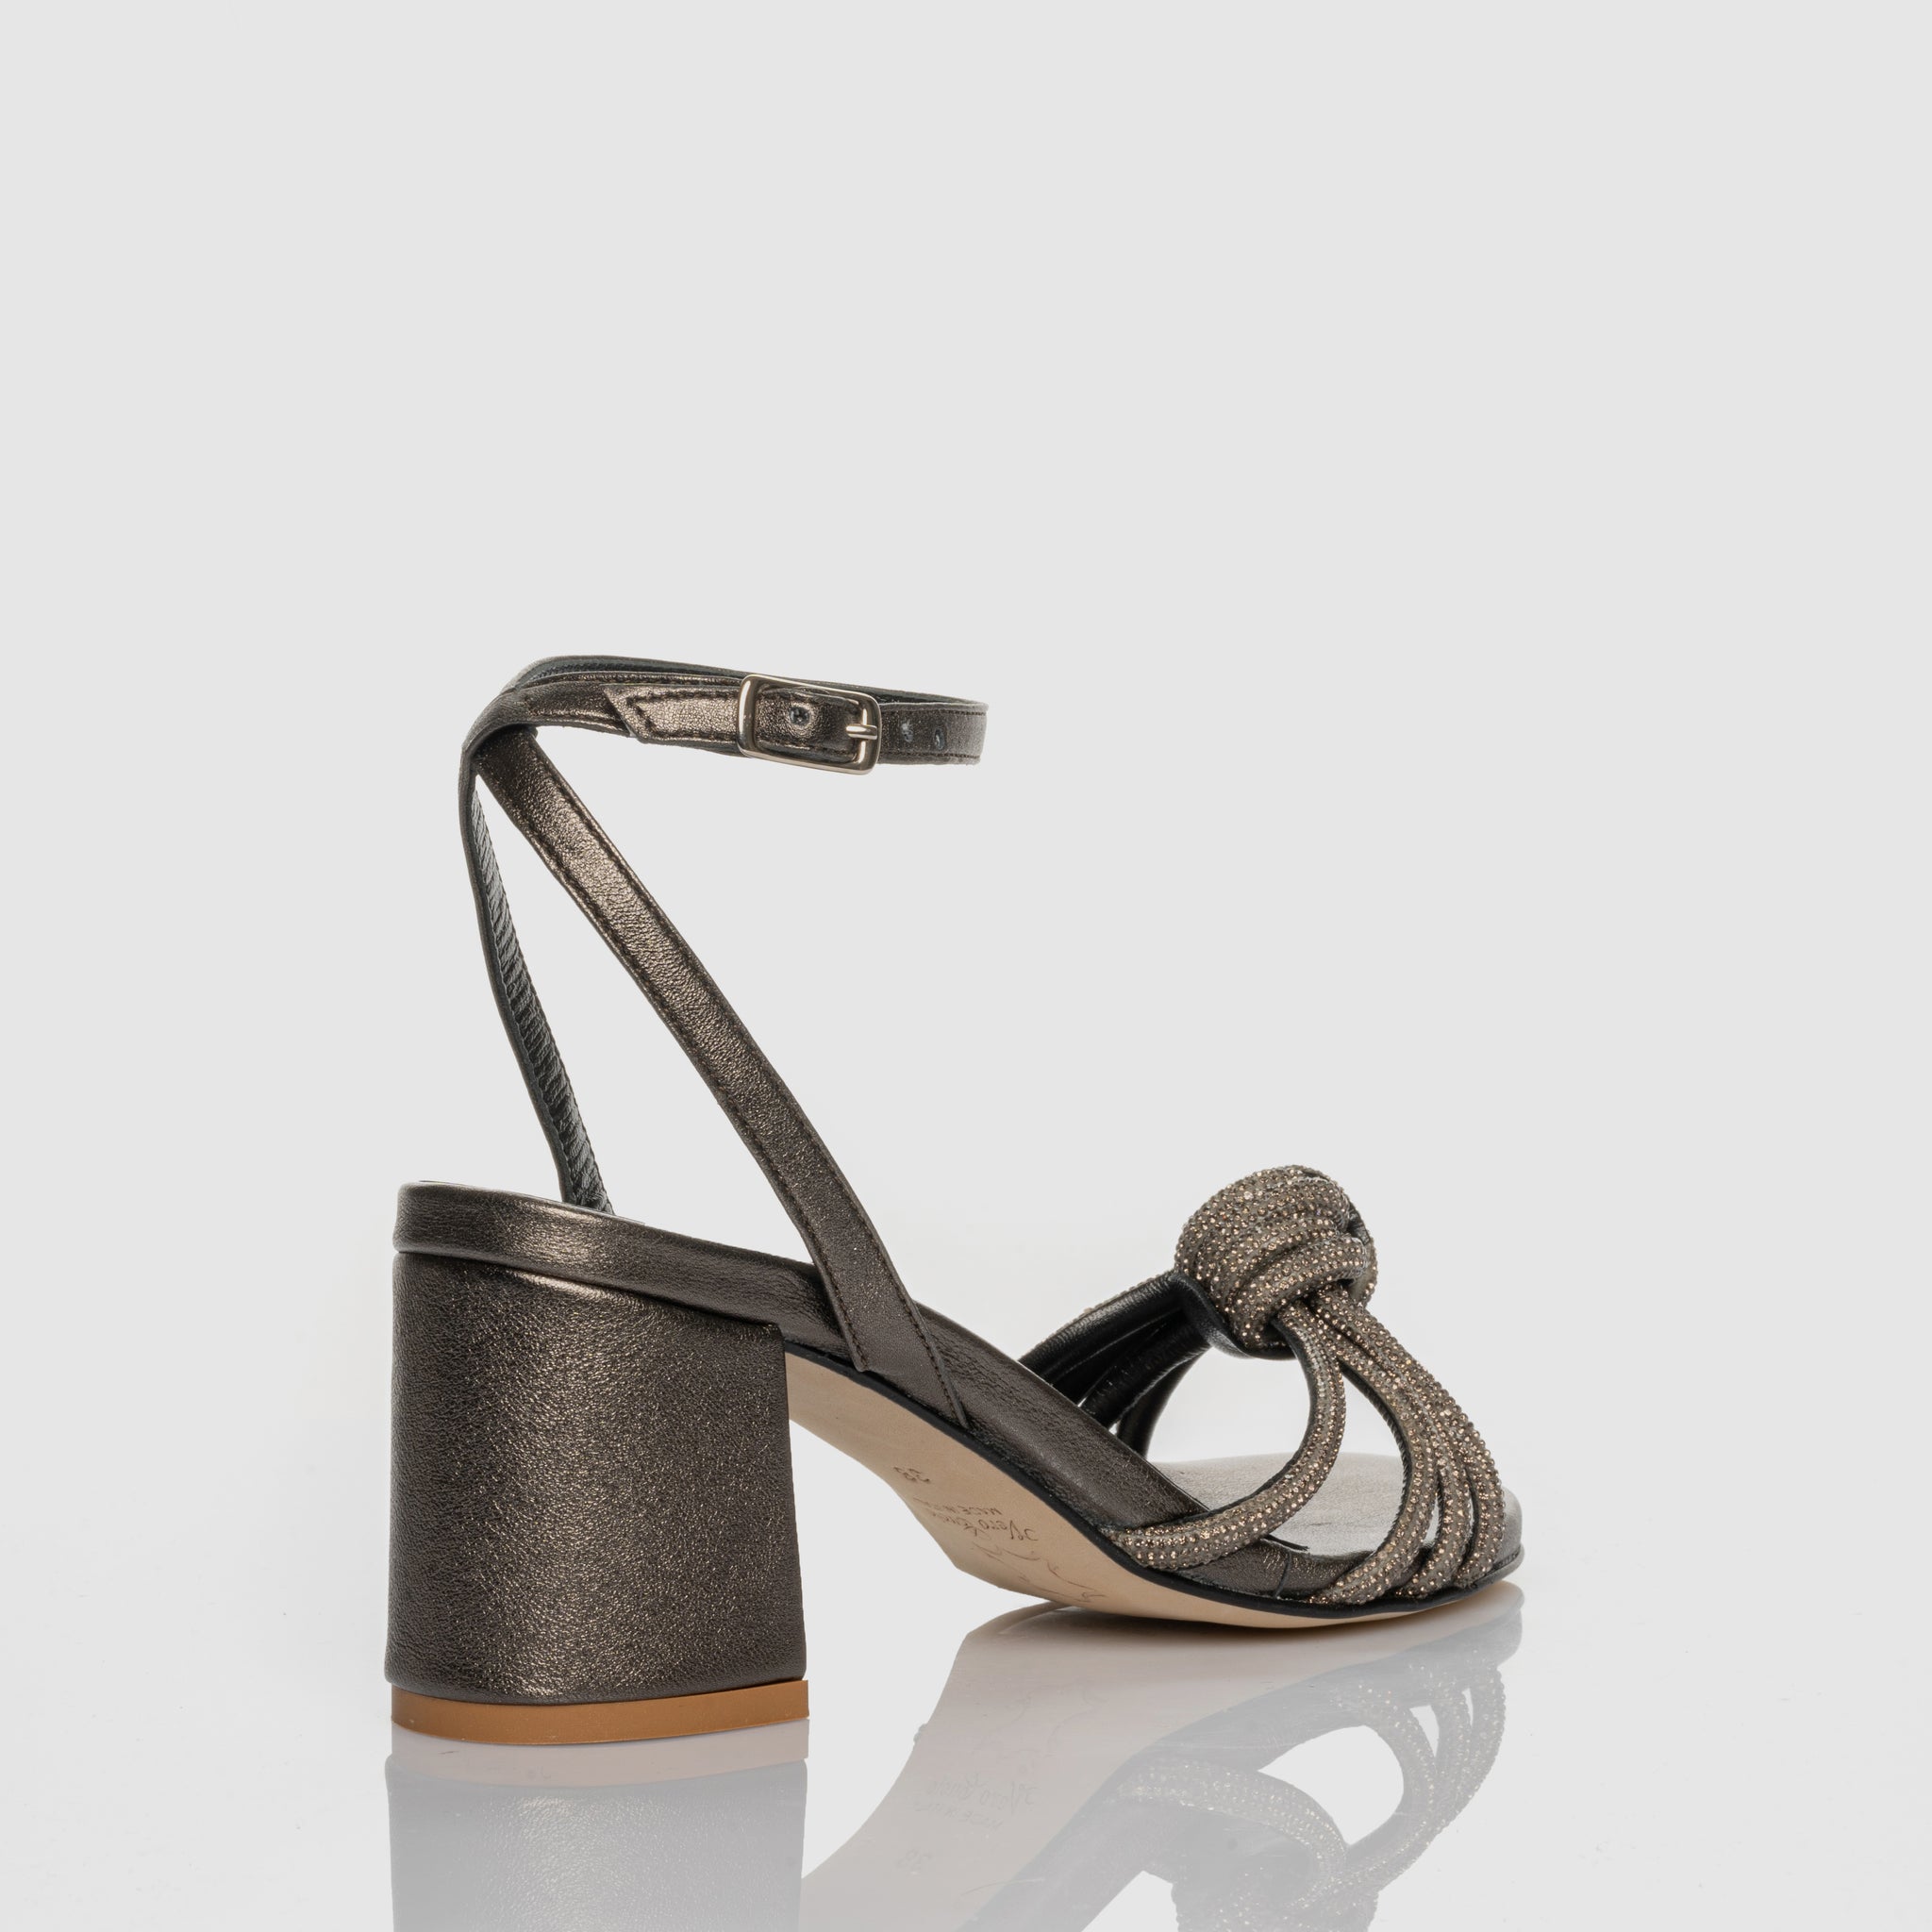 Rainbow Light White Heeled Sandal with knotted microcrystal strap